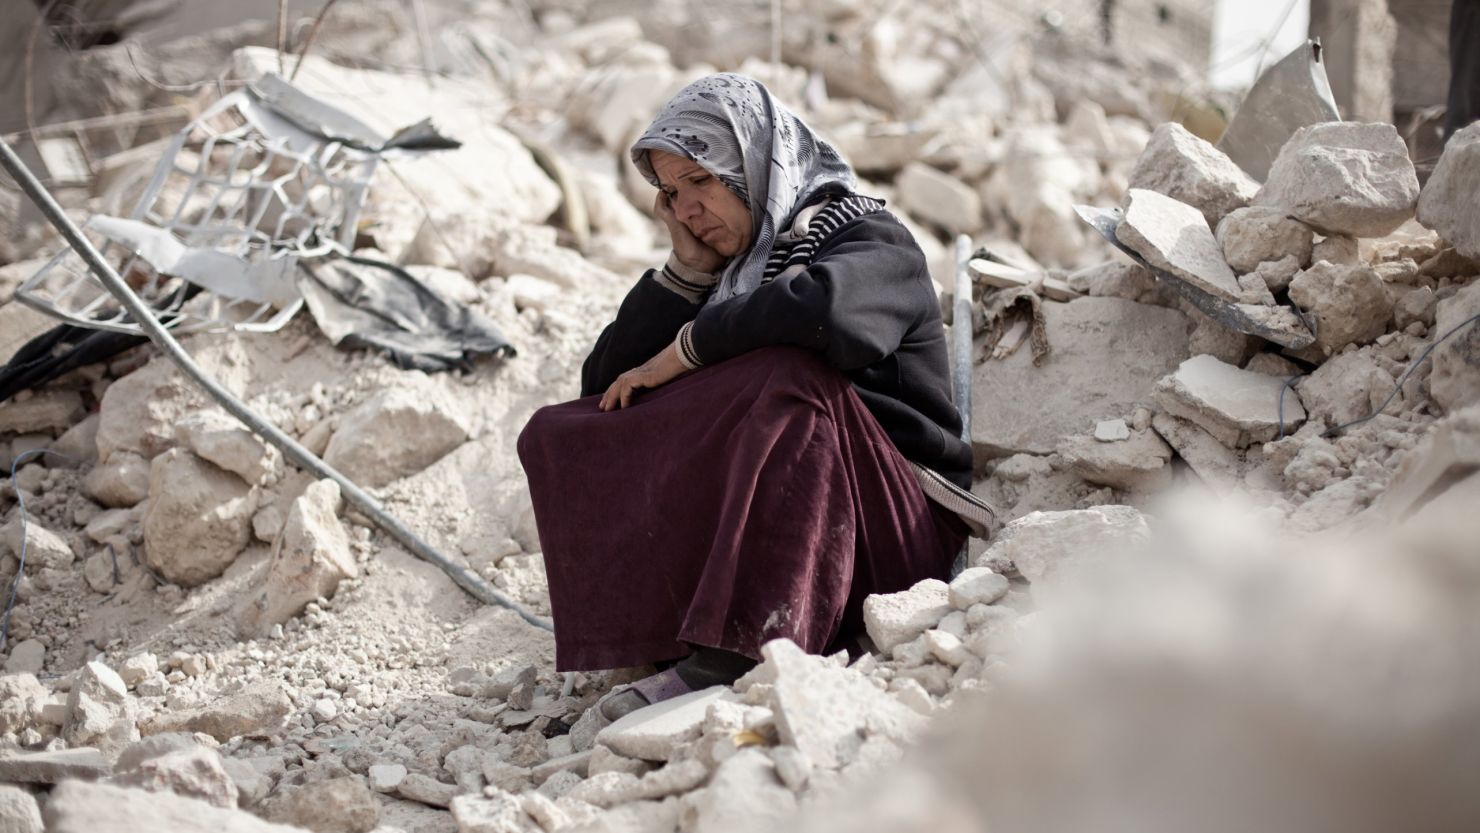 Syrian Zakia Abdullah sits on the rubble of her house in the Tariq al-Bab district of Aleppo, Syria, on February 23, 2013.